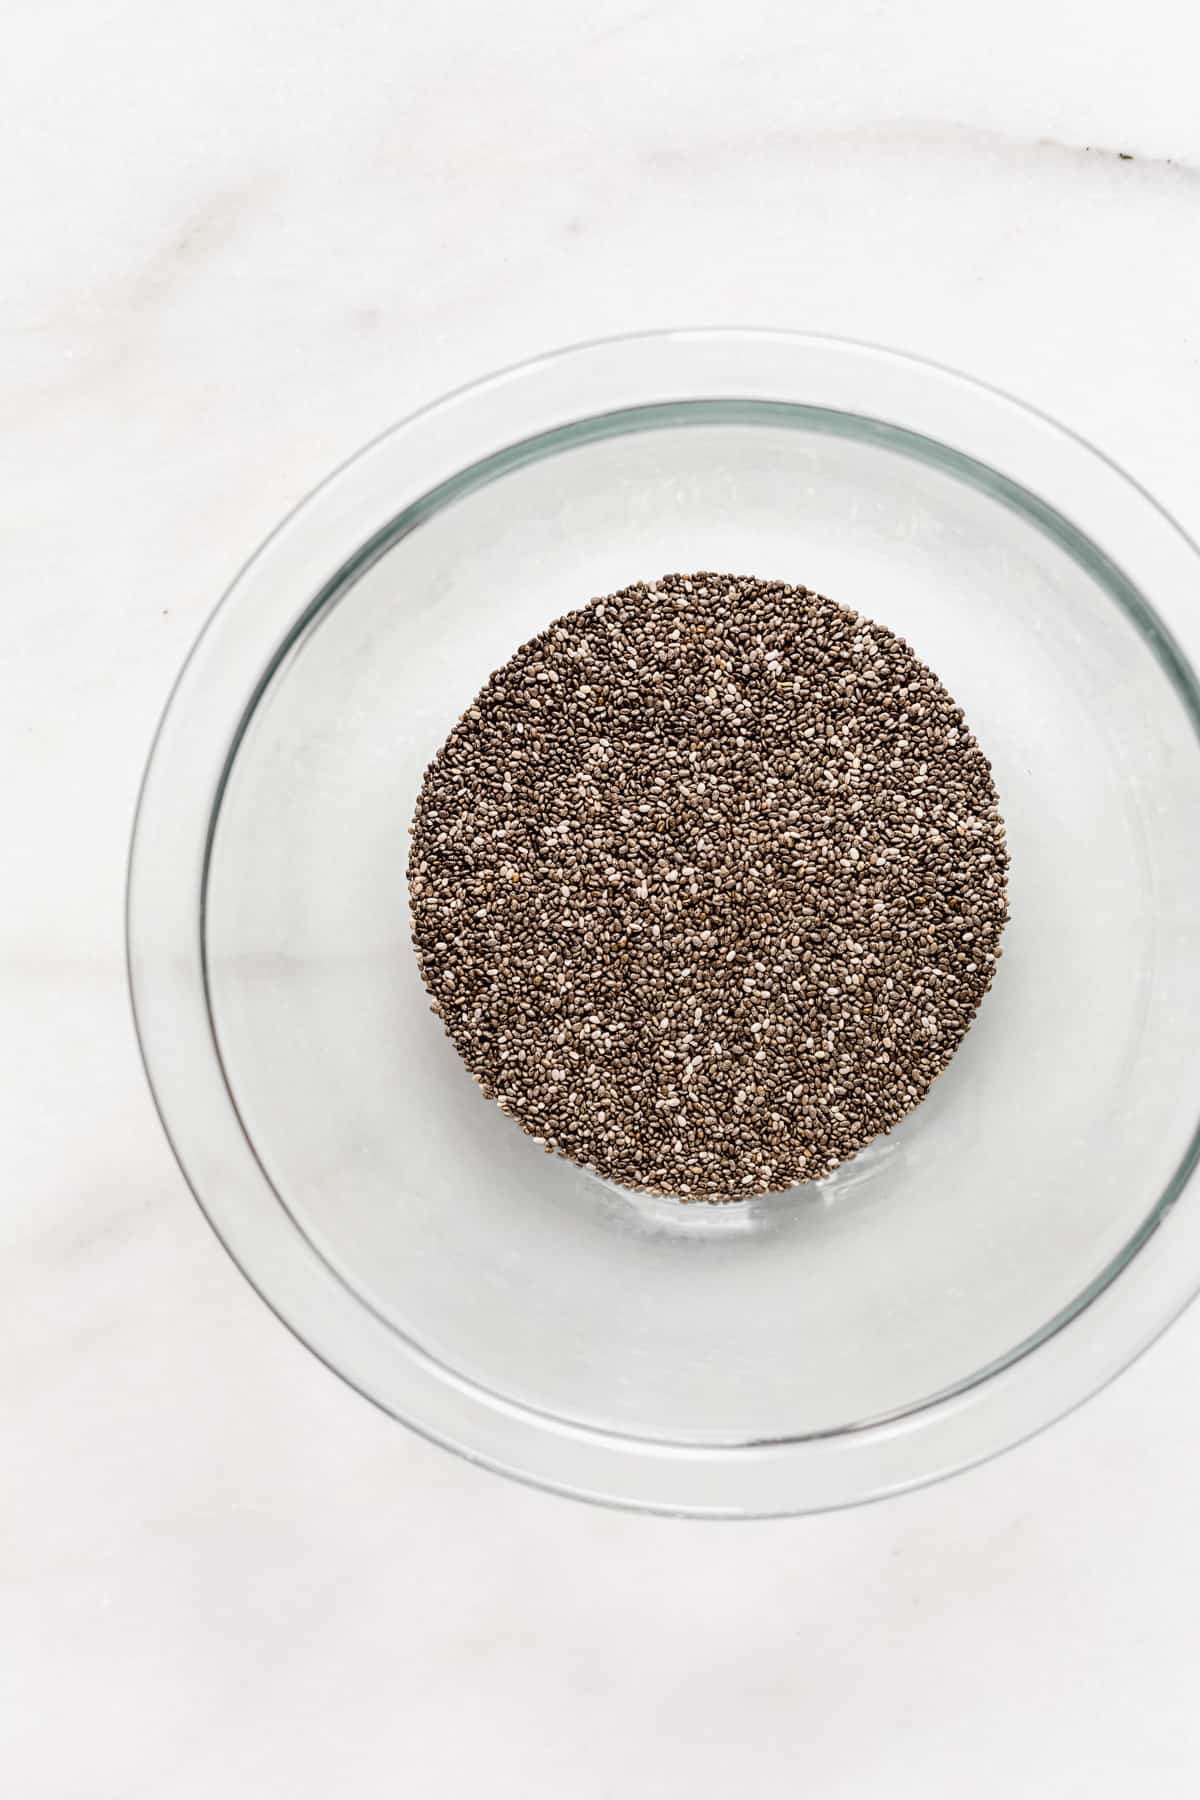 chia seeds in a clear mixing bowl